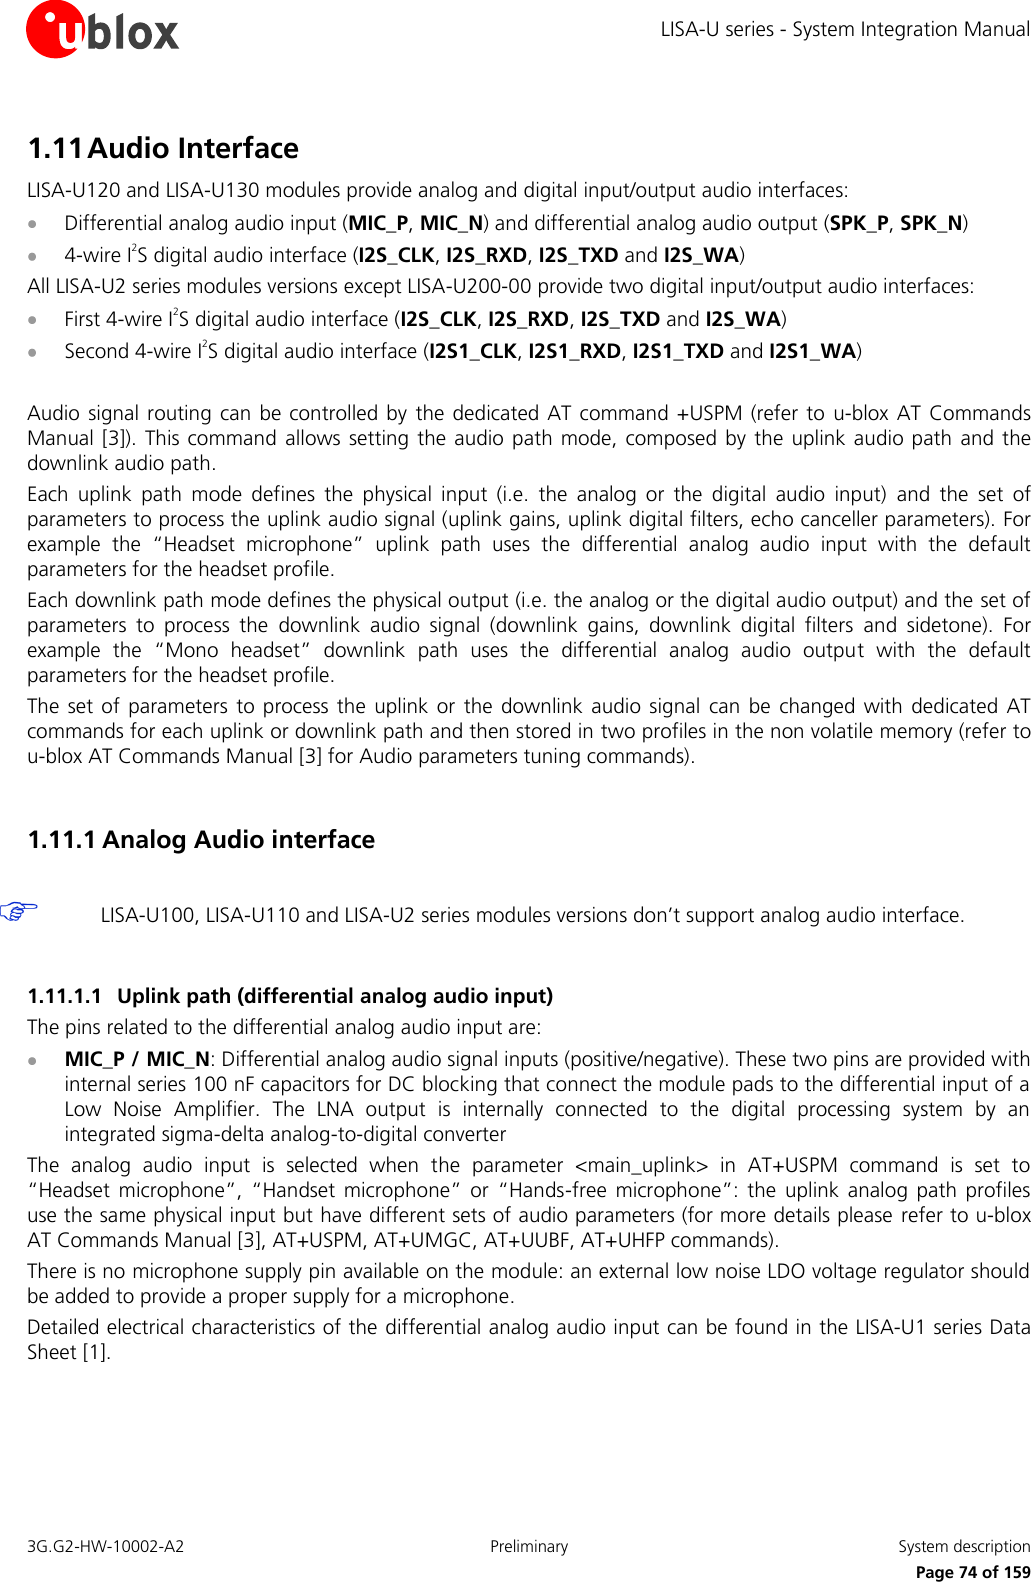 LISA-U series - System Integration Manual 3G.G2-HW-10002-A2  Preliminary  System description      Page 74 of 159 1.11 Audio Interface LISA-U120 and LISA-U130 modules provide analog and digital input/output audio interfaces:  Differential analog audio input (MIC_P, MIC_N) and differential analog audio output (SPK_P, SPK_N)  4-wire I2S digital audio interface (I2S_CLK, I2S_RXD, I2S_TXD and I2S_WA) All LISA-U2 series modules versions except LISA-U200-00 provide two digital input/output audio interfaces:  First 4-wire I2S digital audio interface (I2S_CLK, I2S_RXD, I2S_TXD and I2S_WA)  Second 4-wire I2S digital audio interface (I2S1_CLK, I2S1_RXD, I2S1_TXD and I2S1_WA)  Audio signal routing can  be controlled by  the dedicated AT command  +USPM (refer to  u-blox AT  Commands Manual [3]). This command  allows setting the audio path mode, composed by the  uplink audio path  and the downlink audio path. Each  uplink  path  mode  defines  the  physical  input  (i.e.  the  analog  or  the  digital  audio  input)  and  the  set  of parameters to process the uplink audio signal (uplink gains, uplink digital filters, echo canceller parameters). For example  the  “Headset  microphone”  uplink  path  uses  the  differential  analog  audio  input  with  the  default parameters for the headset profile. Each downlink path mode defines the physical output (i.e. the analog or the digital audio output) and the set of parameters  to  process  the  downlink  audio  signal  (downlink  gains,  downlink  digital  filters  and  sidetone).  For example  the  “Mono  headset”  downlink  path  uses  the  differential  analog  audio  output  with  the  default parameters for the headset profile. The  set of parameters  to process  the  uplink or  the downlink audio  signal  can  be changed  with dedicated AT commands for each uplink or downlink path and then stored in two profiles in the non volatile memory (refer to u-blox AT Commands Manual [3] for Audio parameters tuning commands).  1.11.1 Analog Audio interface   LISA-U100, LISA-U110 and LISA-U2 series modules versions don’t support analog audio interface.  1.11.1.1 Uplink path (differential analog audio input) The pins related to the differential analog audio input are:  MIC_P / MIC_N: Differential analog audio signal inputs (positive/negative). These two pins are provided with internal series 100 nF capacitors for DC blocking that connect the module pads to the differential input of a Low  Noise  Amplifier.  The  LNA  output  is  internally  connected  to  the  digital  processing  system  by  an integrated sigma-delta analog-to-digital converter The  analog  audio  input  is  selected  when  the  parameter  &lt;main_uplink&gt;  in  AT+USPM  command  is  set  to “Headset  microphone”,  “Handset  microphone”  or  “Hands-free  microphone”:  the  uplink analog  path  profiles use the same physical input but have different sets of audio parameters (for more details please  refer to u-blox AT Commands Manual [3], AT+USPM, AT+UMGC, AT+UUBF, AT+UHFP commands). There is no microphone supply pin available on the module: an external low noise LDO voltage regulator should be added to provide a proper supply for a microphone. Detailed electrical characteristics of the differential analog audio input can be found in the LISA-U1 series Data Sheet [1].  